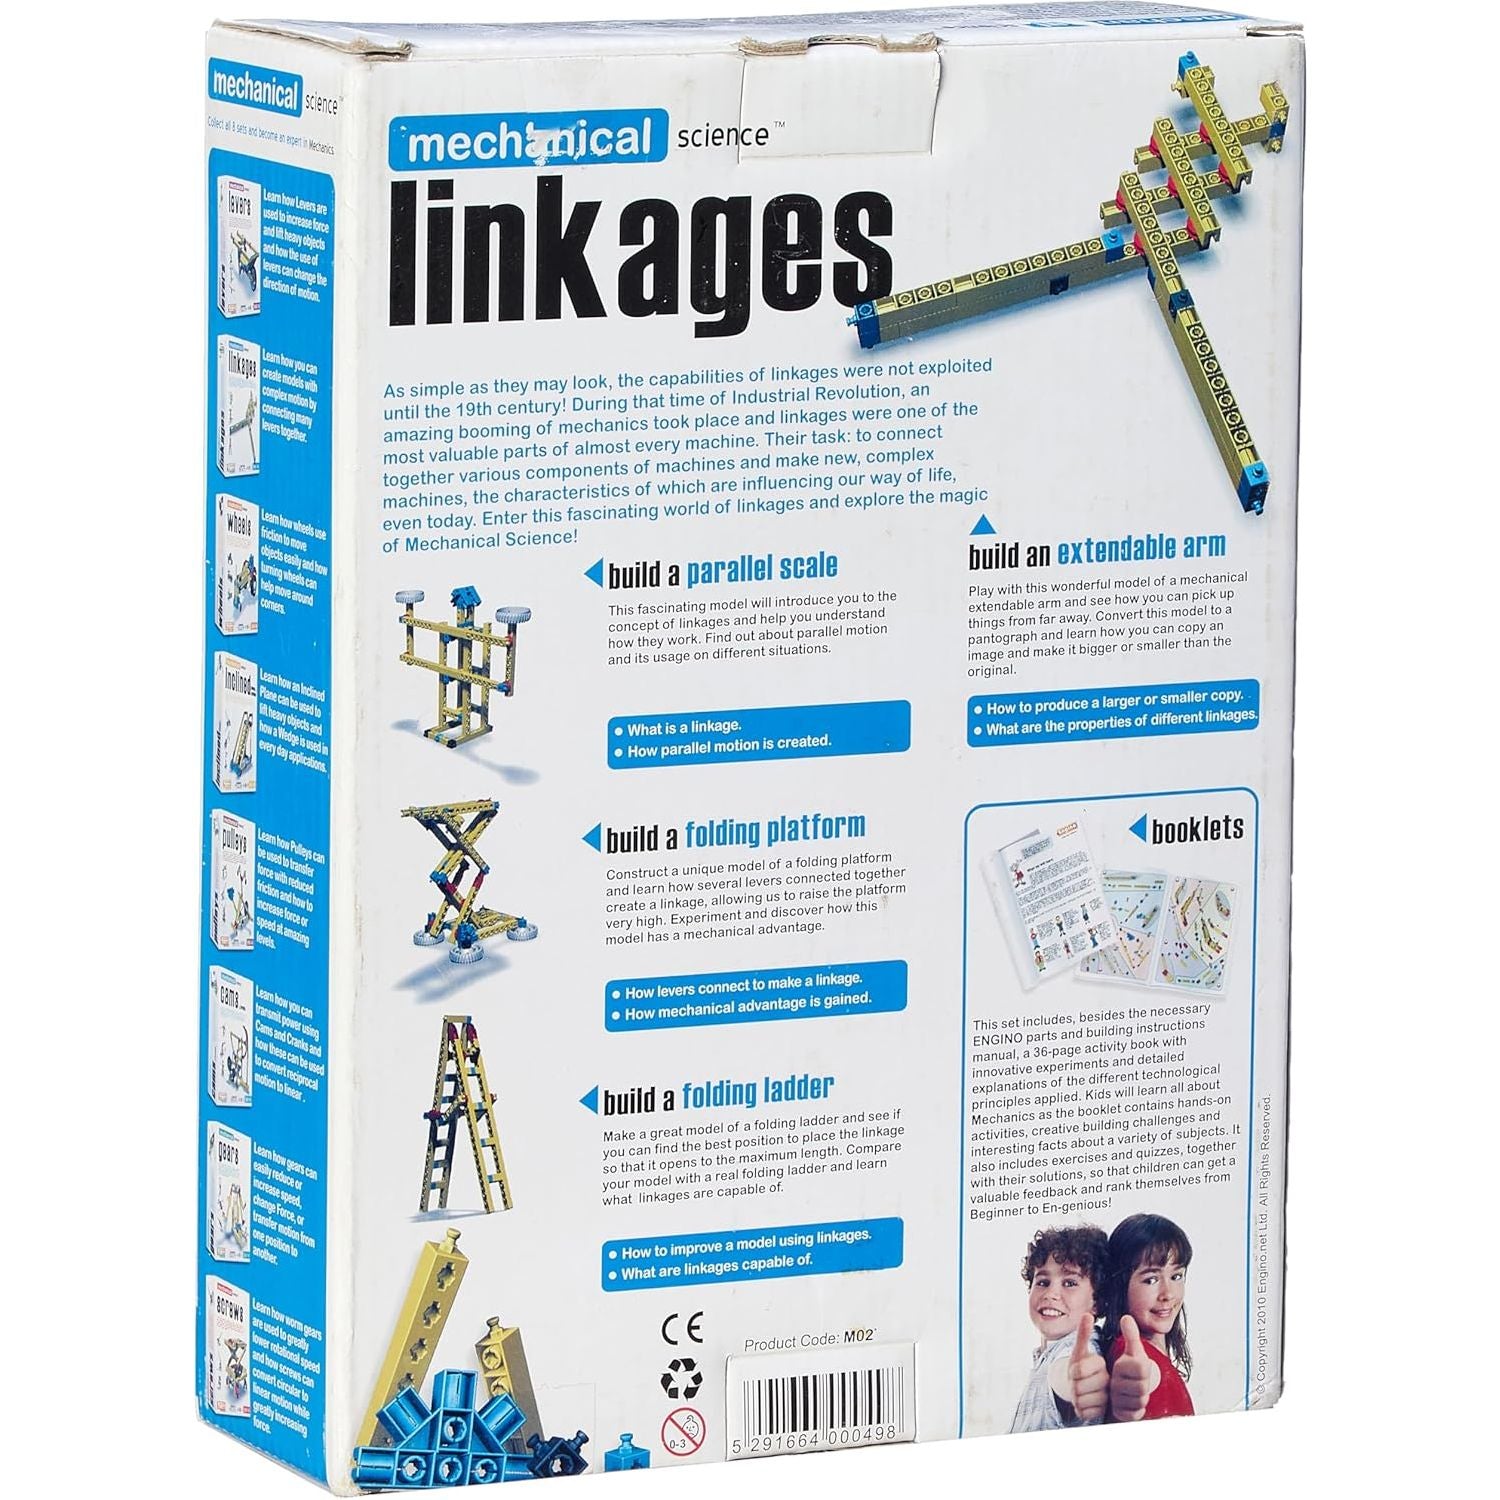 Engino mechanical science series M02 - linkages